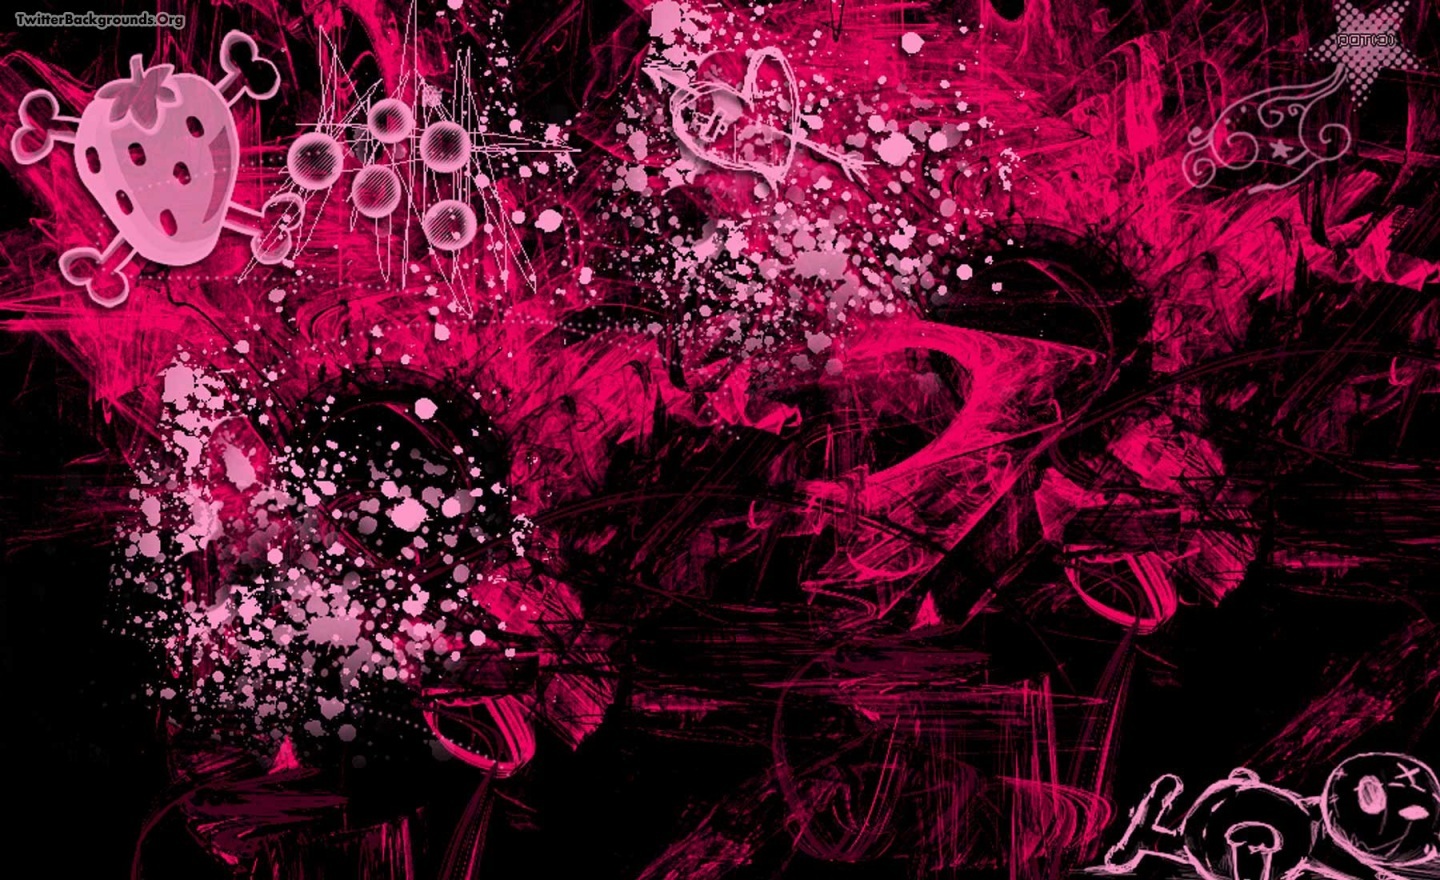 Girly Awesome Photo Wallpaper Desktop With Girly Wallpapers Red And Black Background For Debut 1440x880 Wallpaper Teahub Io Girly wallpapers for the computer. girly awesome photo wallpaper desktop